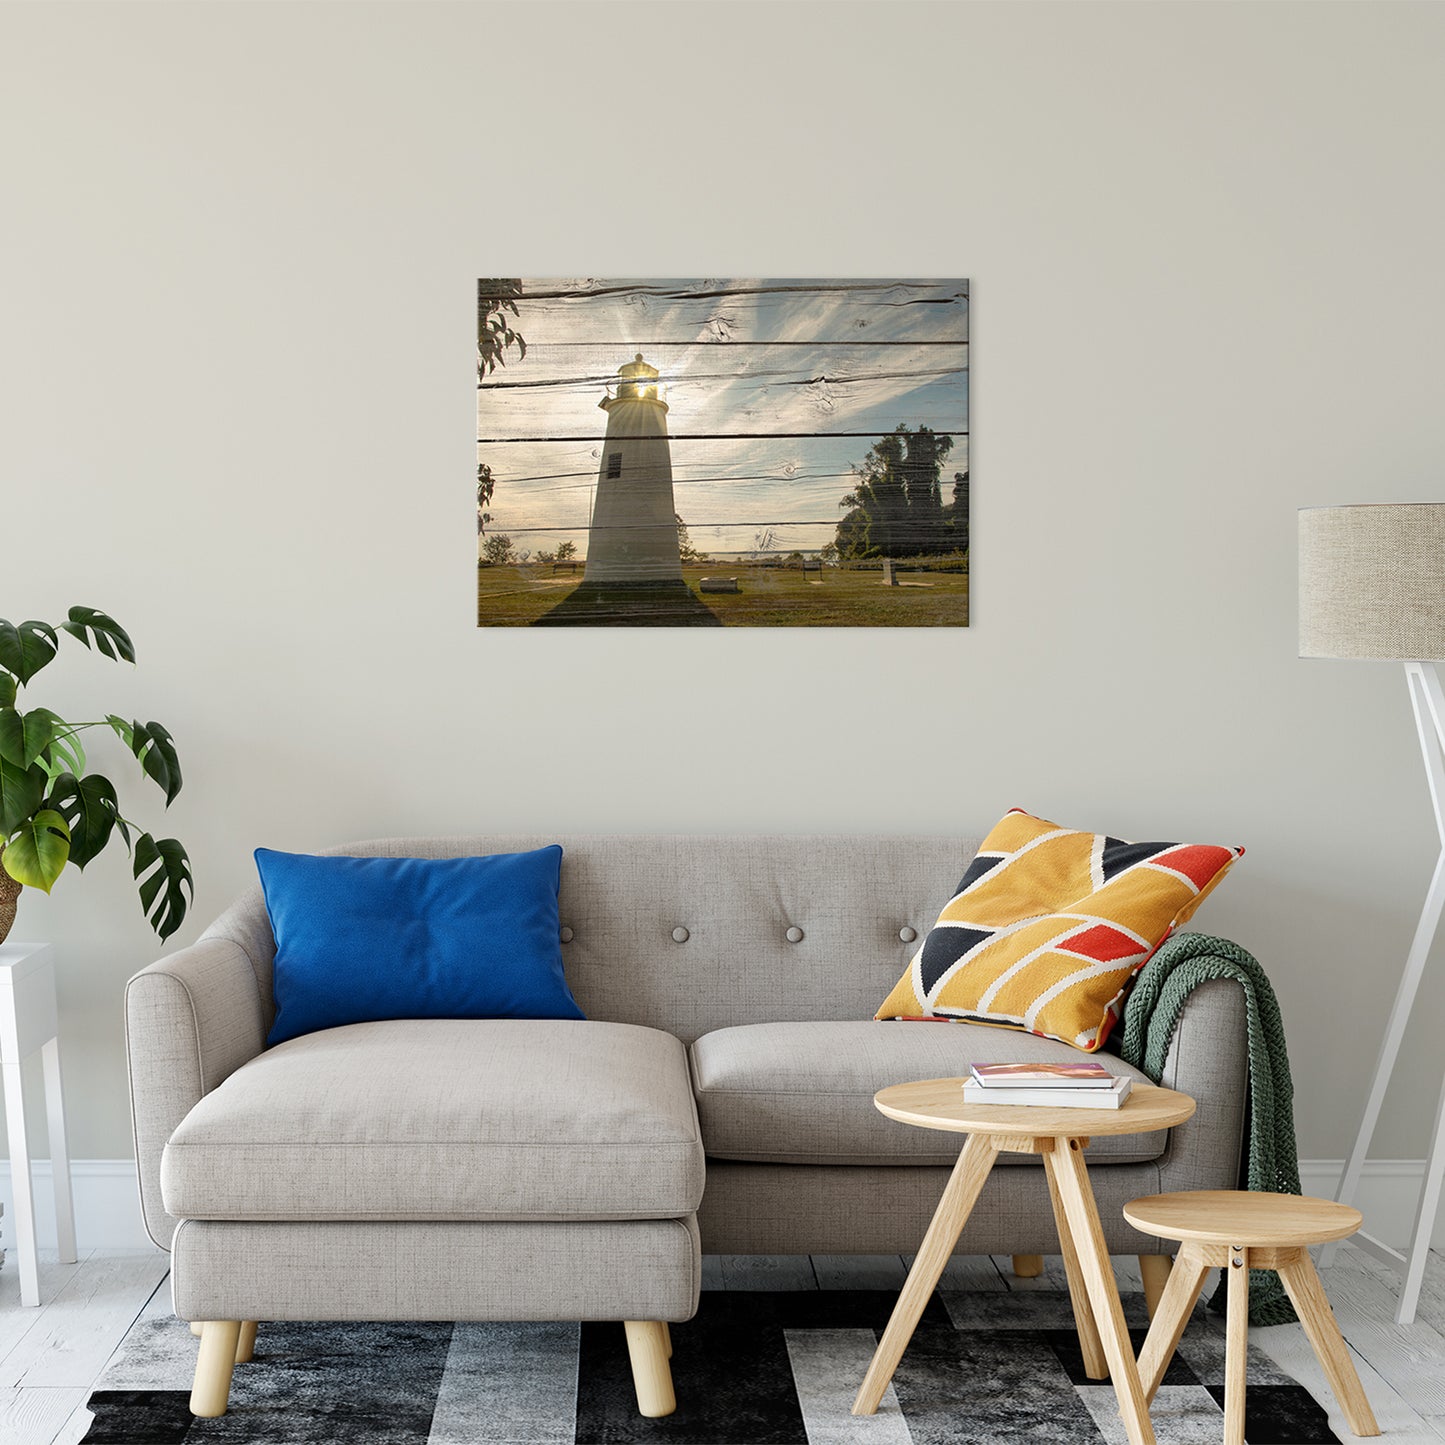 Faux Rustic Reclaimed Wood Turkey Point Lighthouse Fine Art Canvas Wall Art Prints 24" x 36" - PIPAFINEART